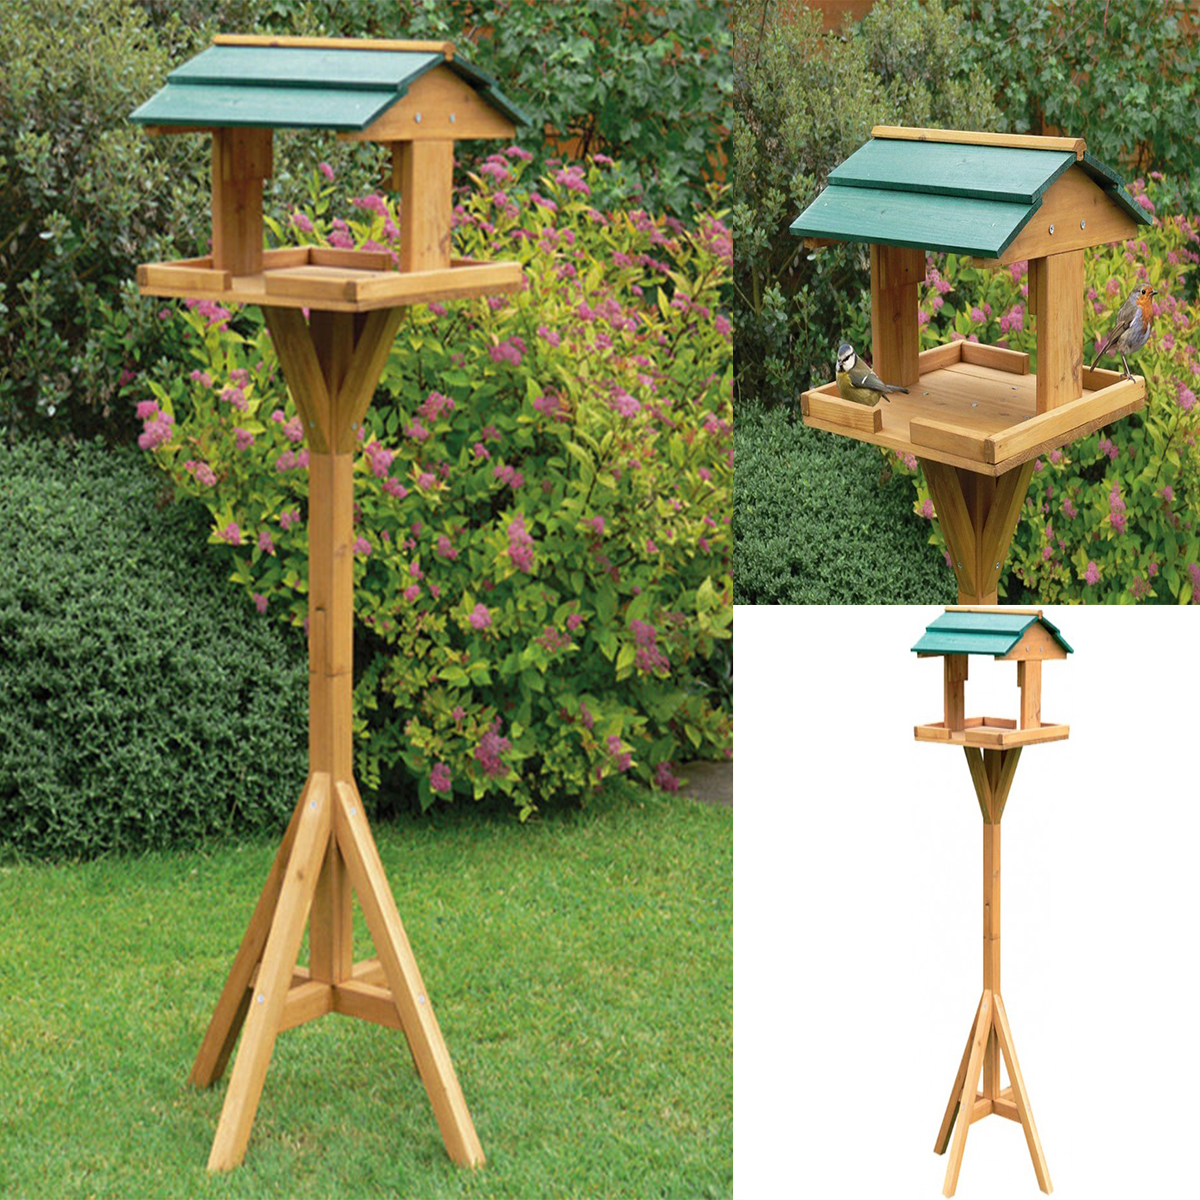 bird table plans: how to make